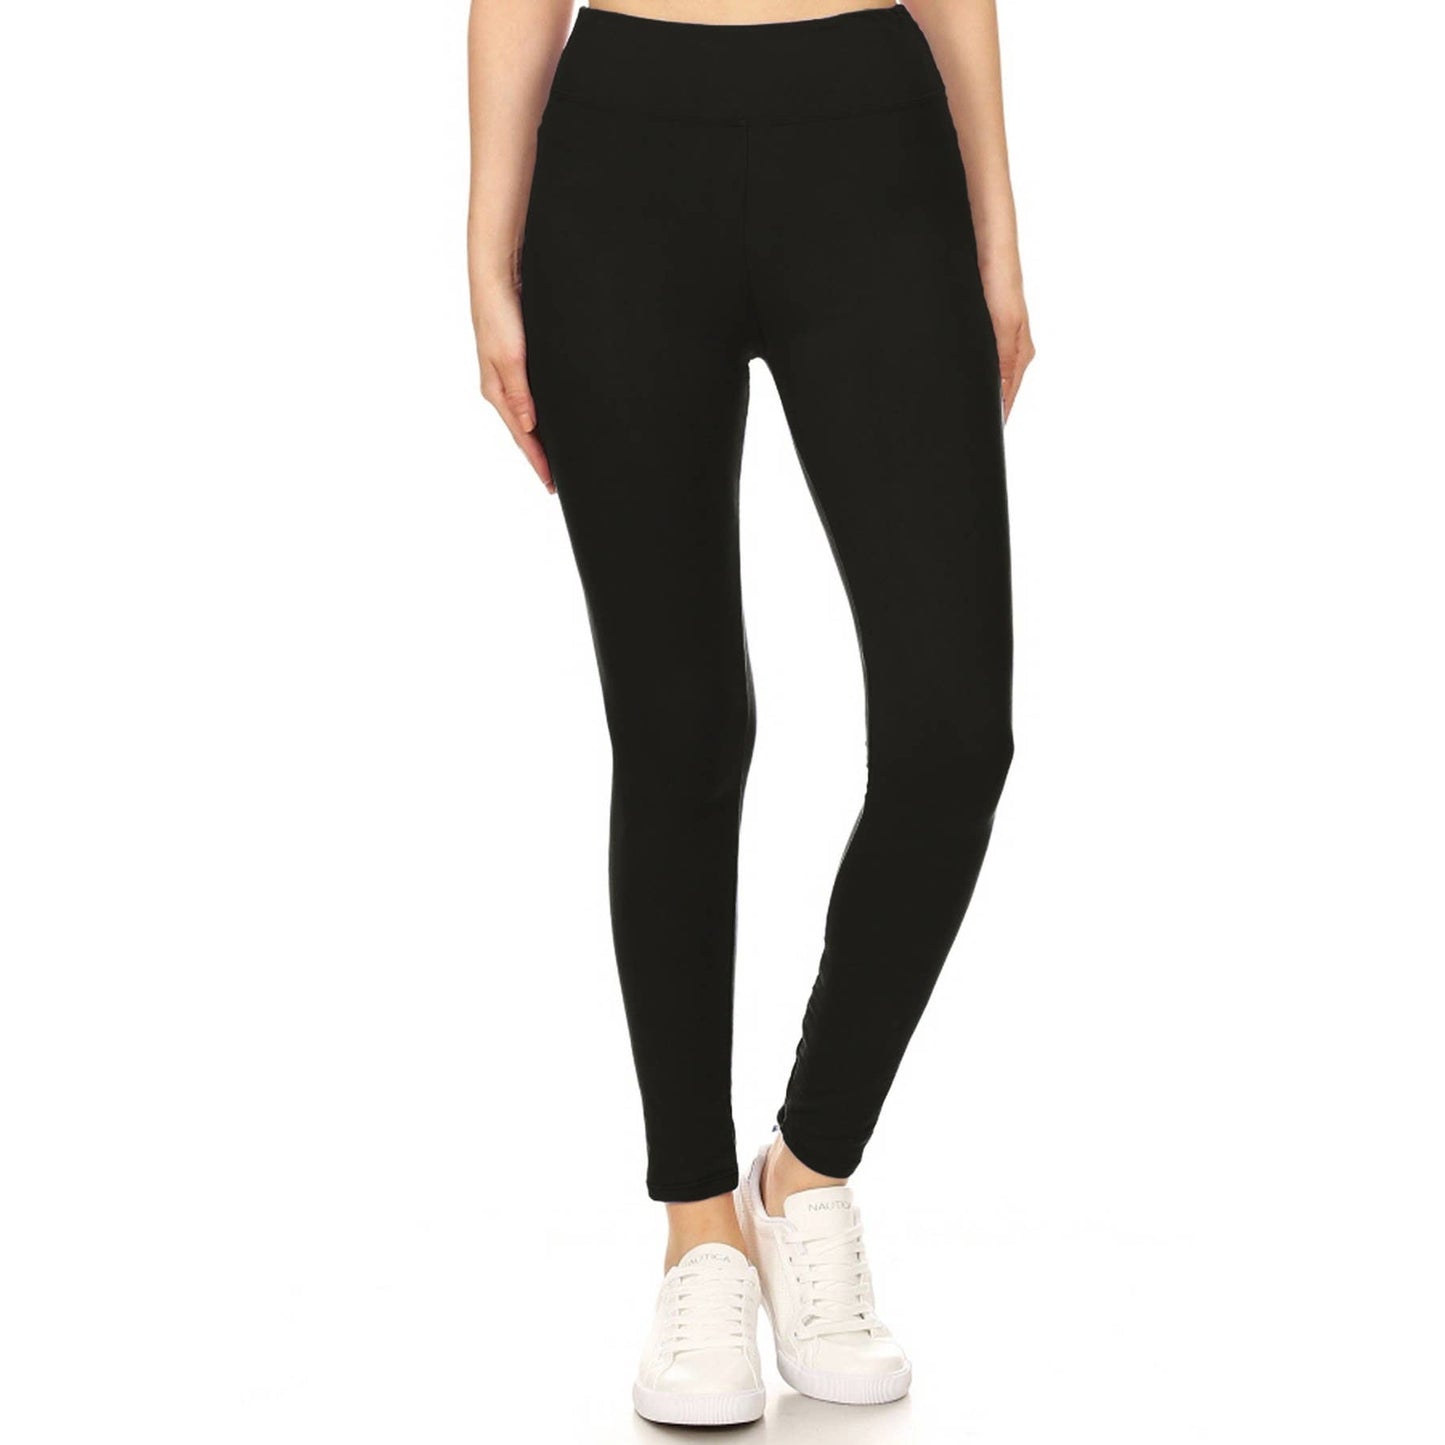 3" Yoga Band Buttery Soft Solid Leggings- BLACK